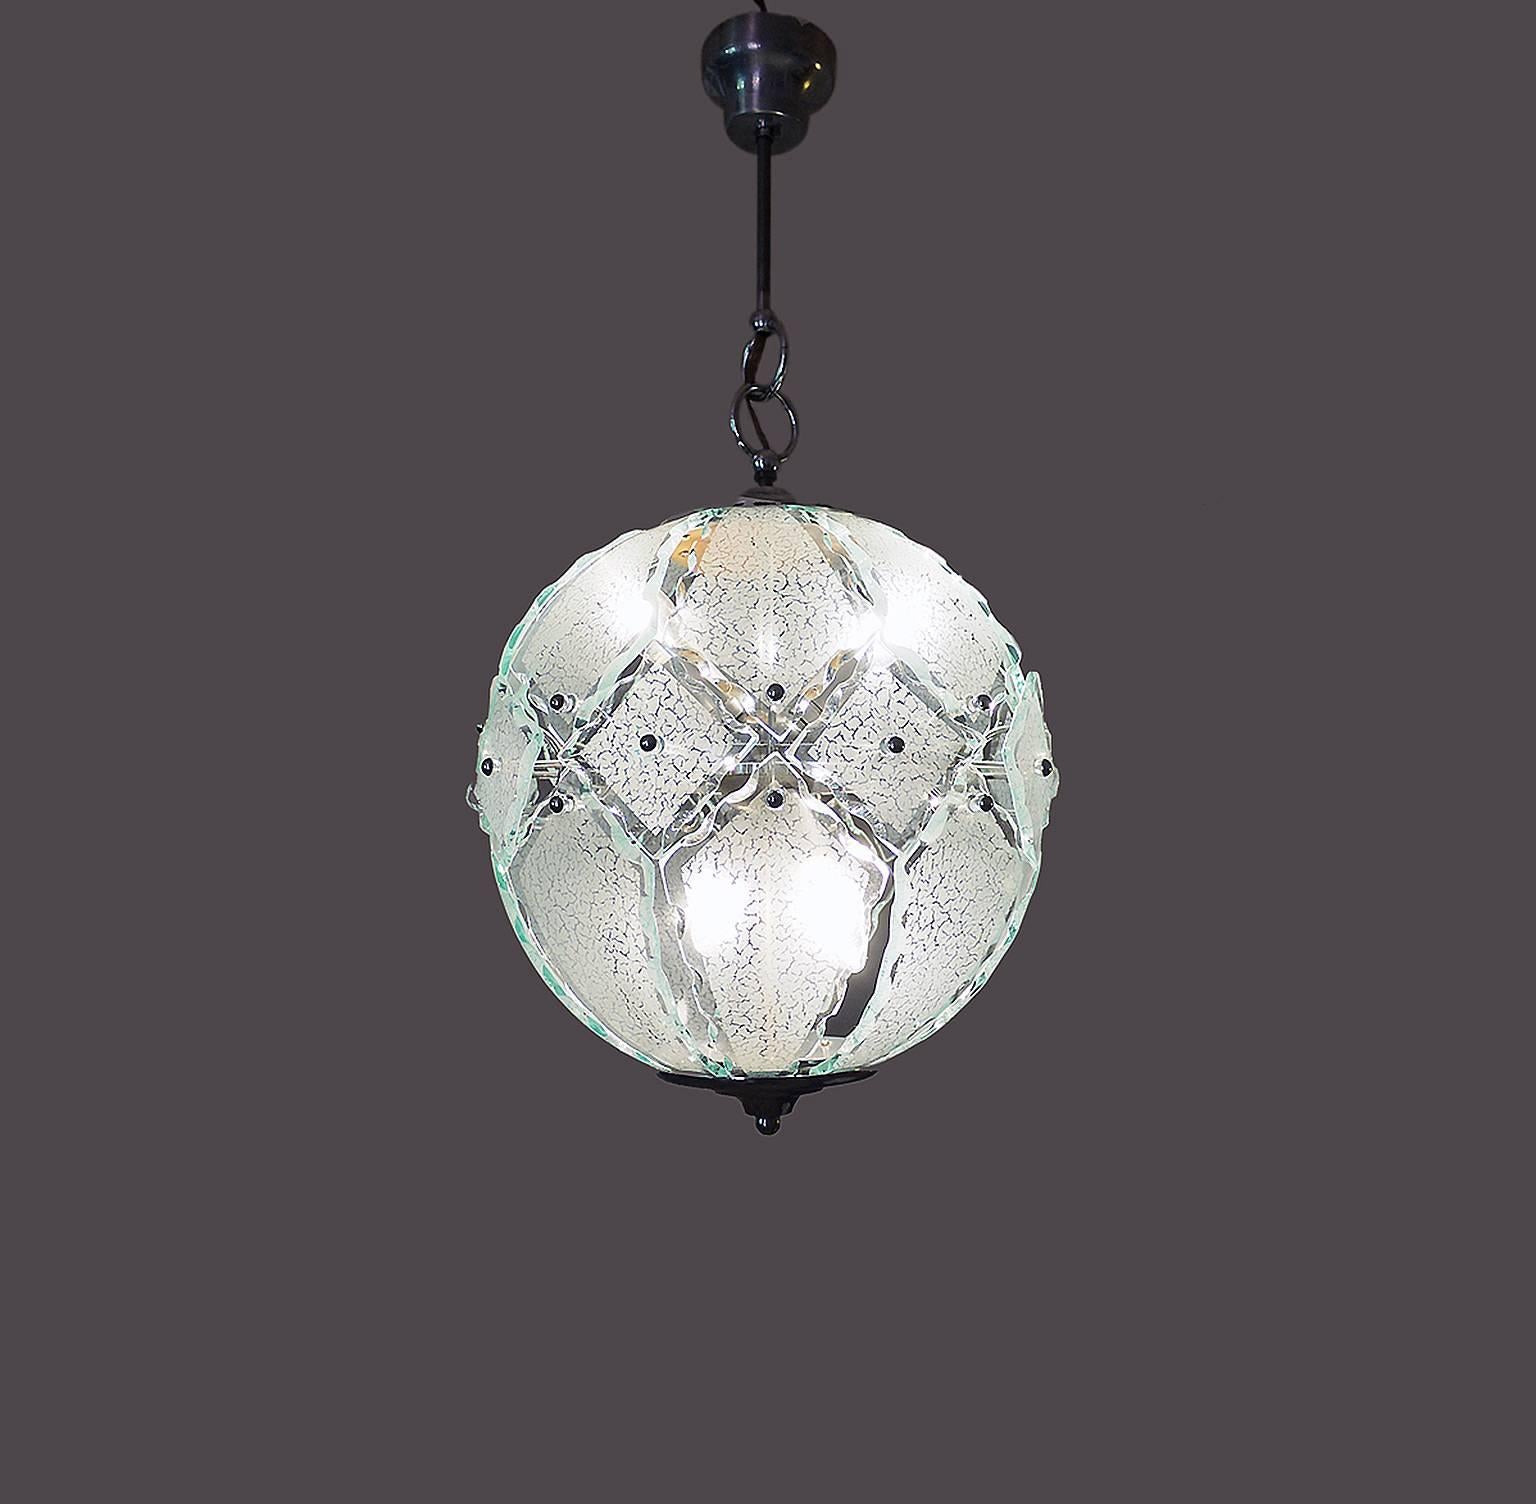 Elegant spherical glass chandelier by O4 (Zero Quattro) edited by Fontana Arte, Milano, Italy in the 1970s. Made with elements of cut Murano glass and a chromed sputnik frame. Zero Quattro was a very small company based in Milan, Italy. 

Lighting: